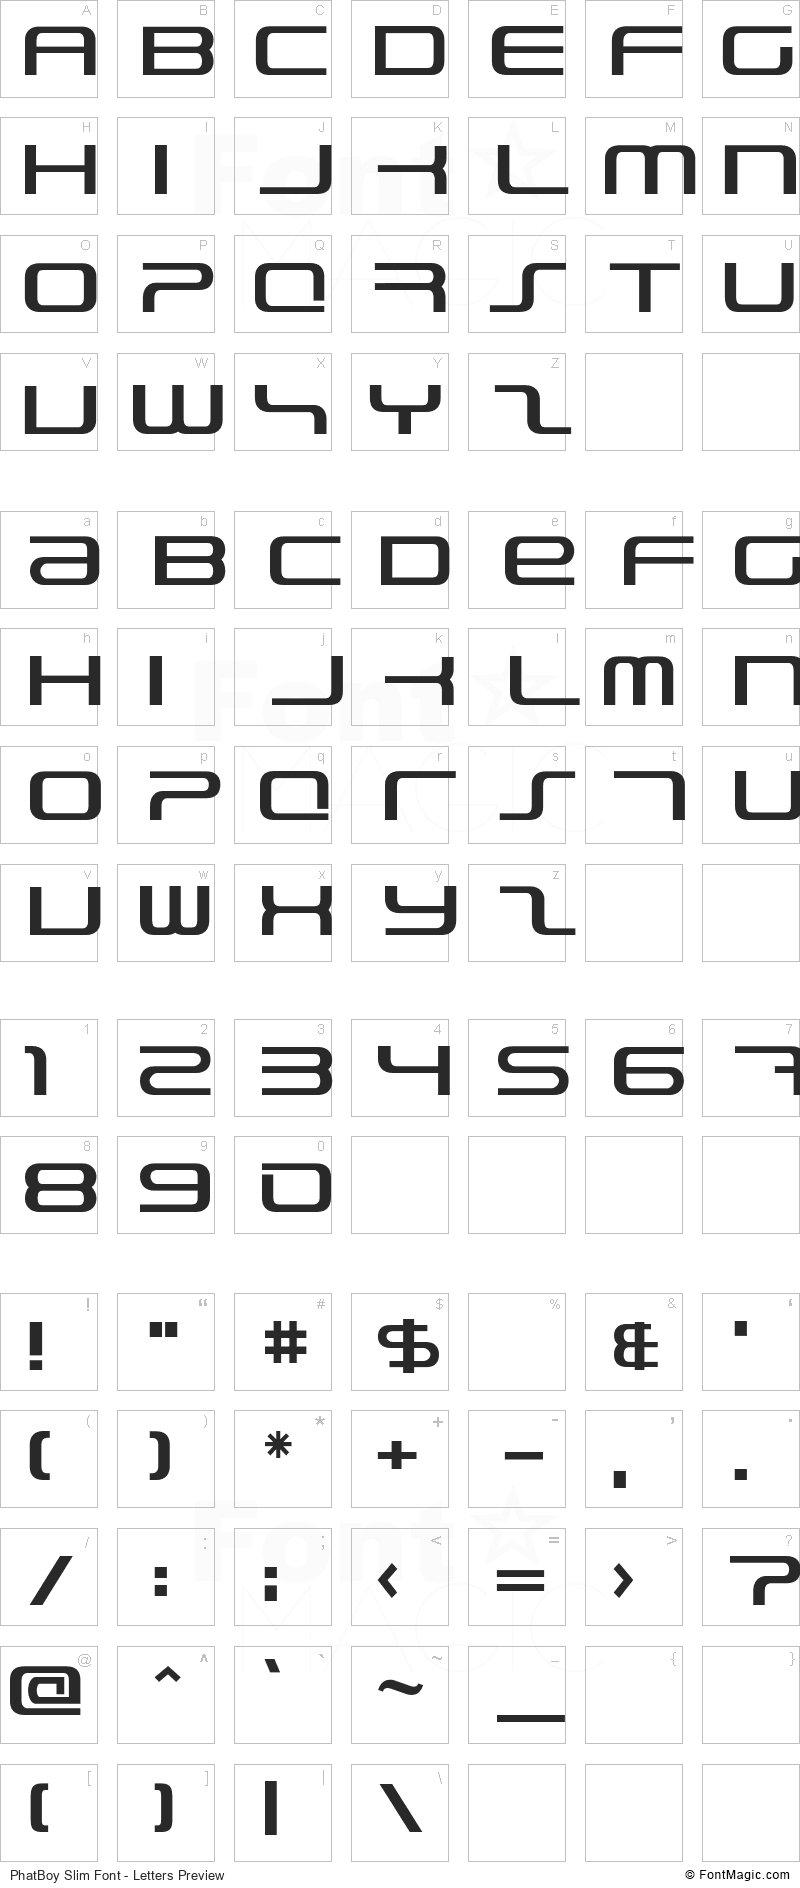 PhatBoy Slim Font - All Latters Preview Chart